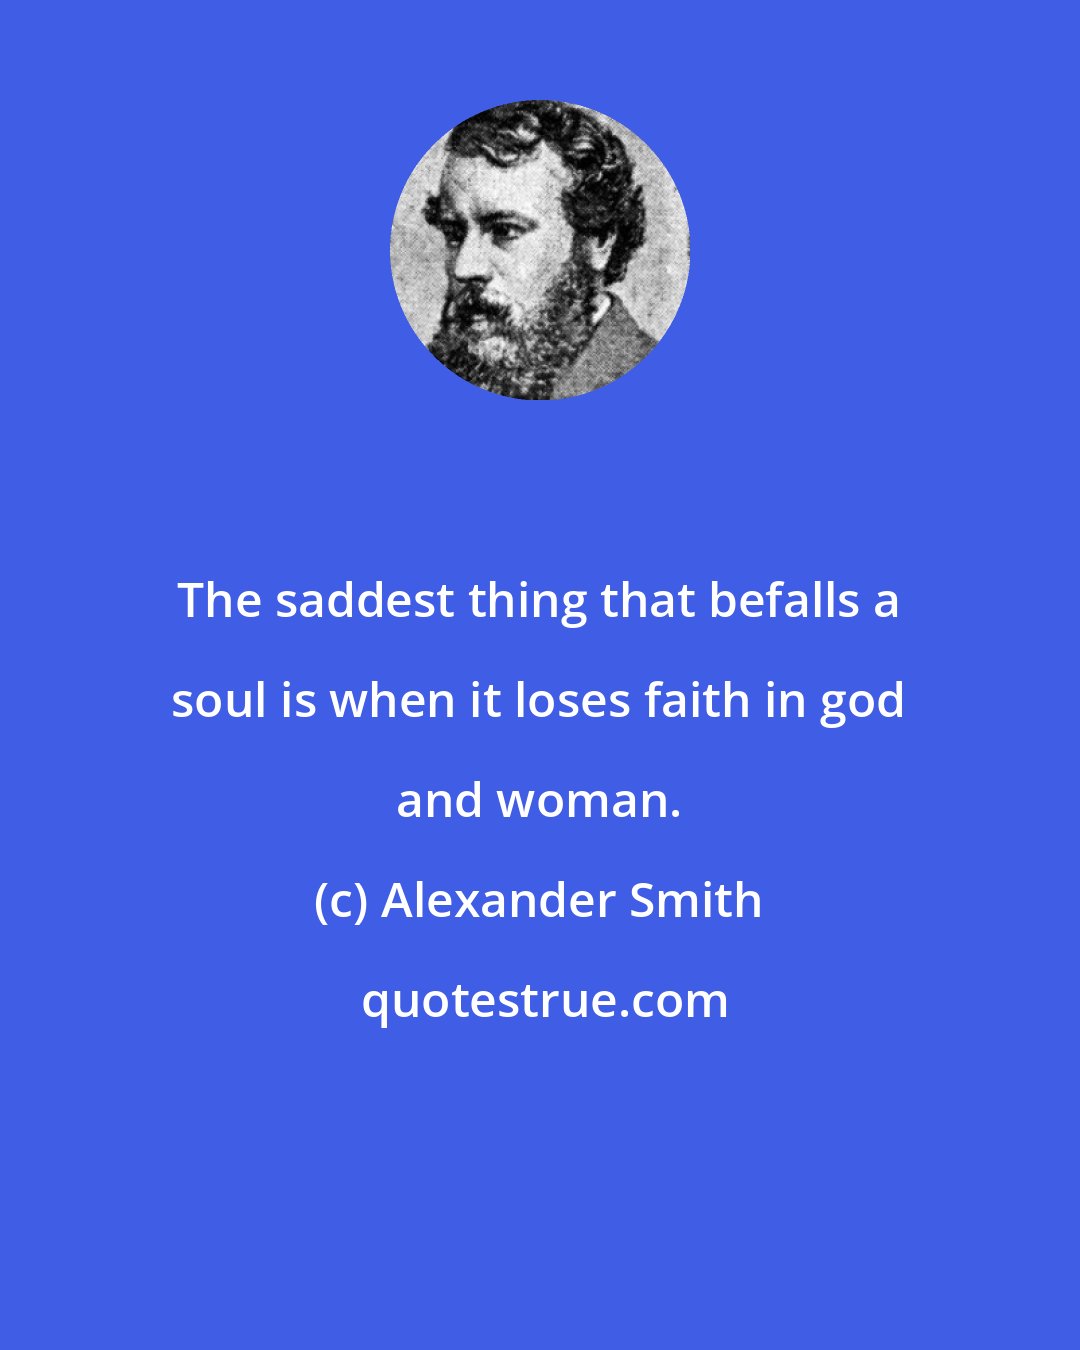 Alexander Smith: The saddest thing that befalls a soul is when it loses faith in god and woman.